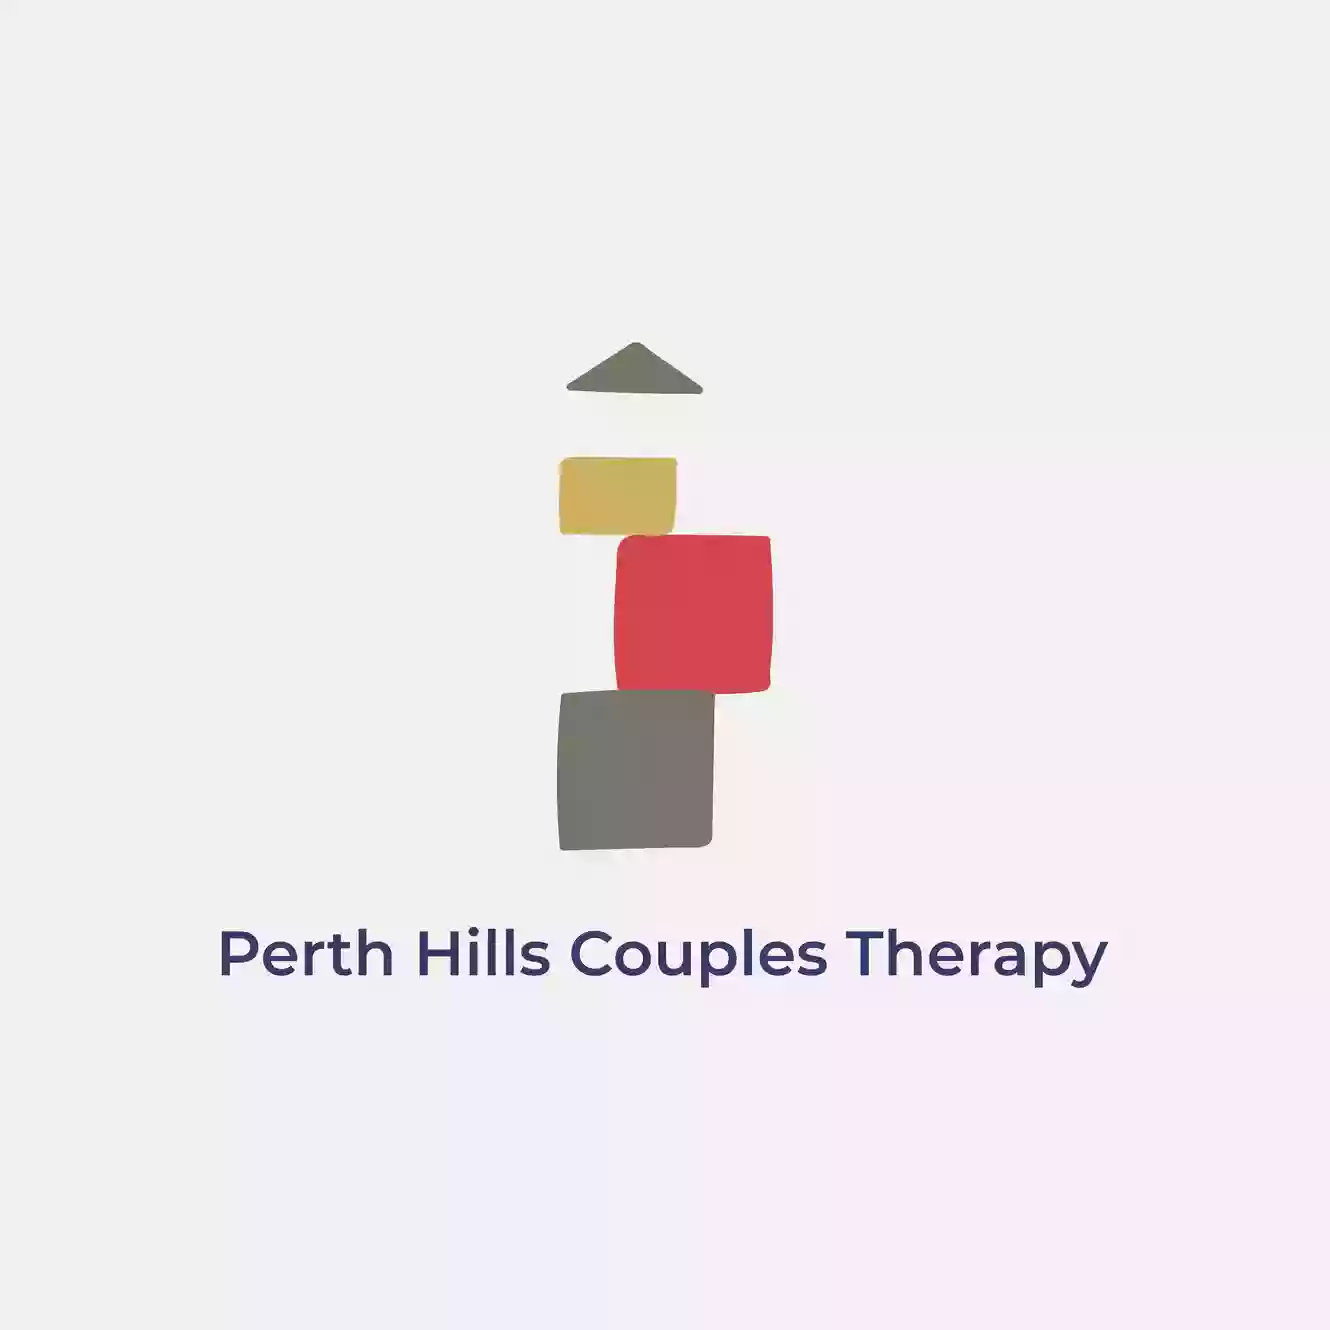 Perth Hills Couples Therapy